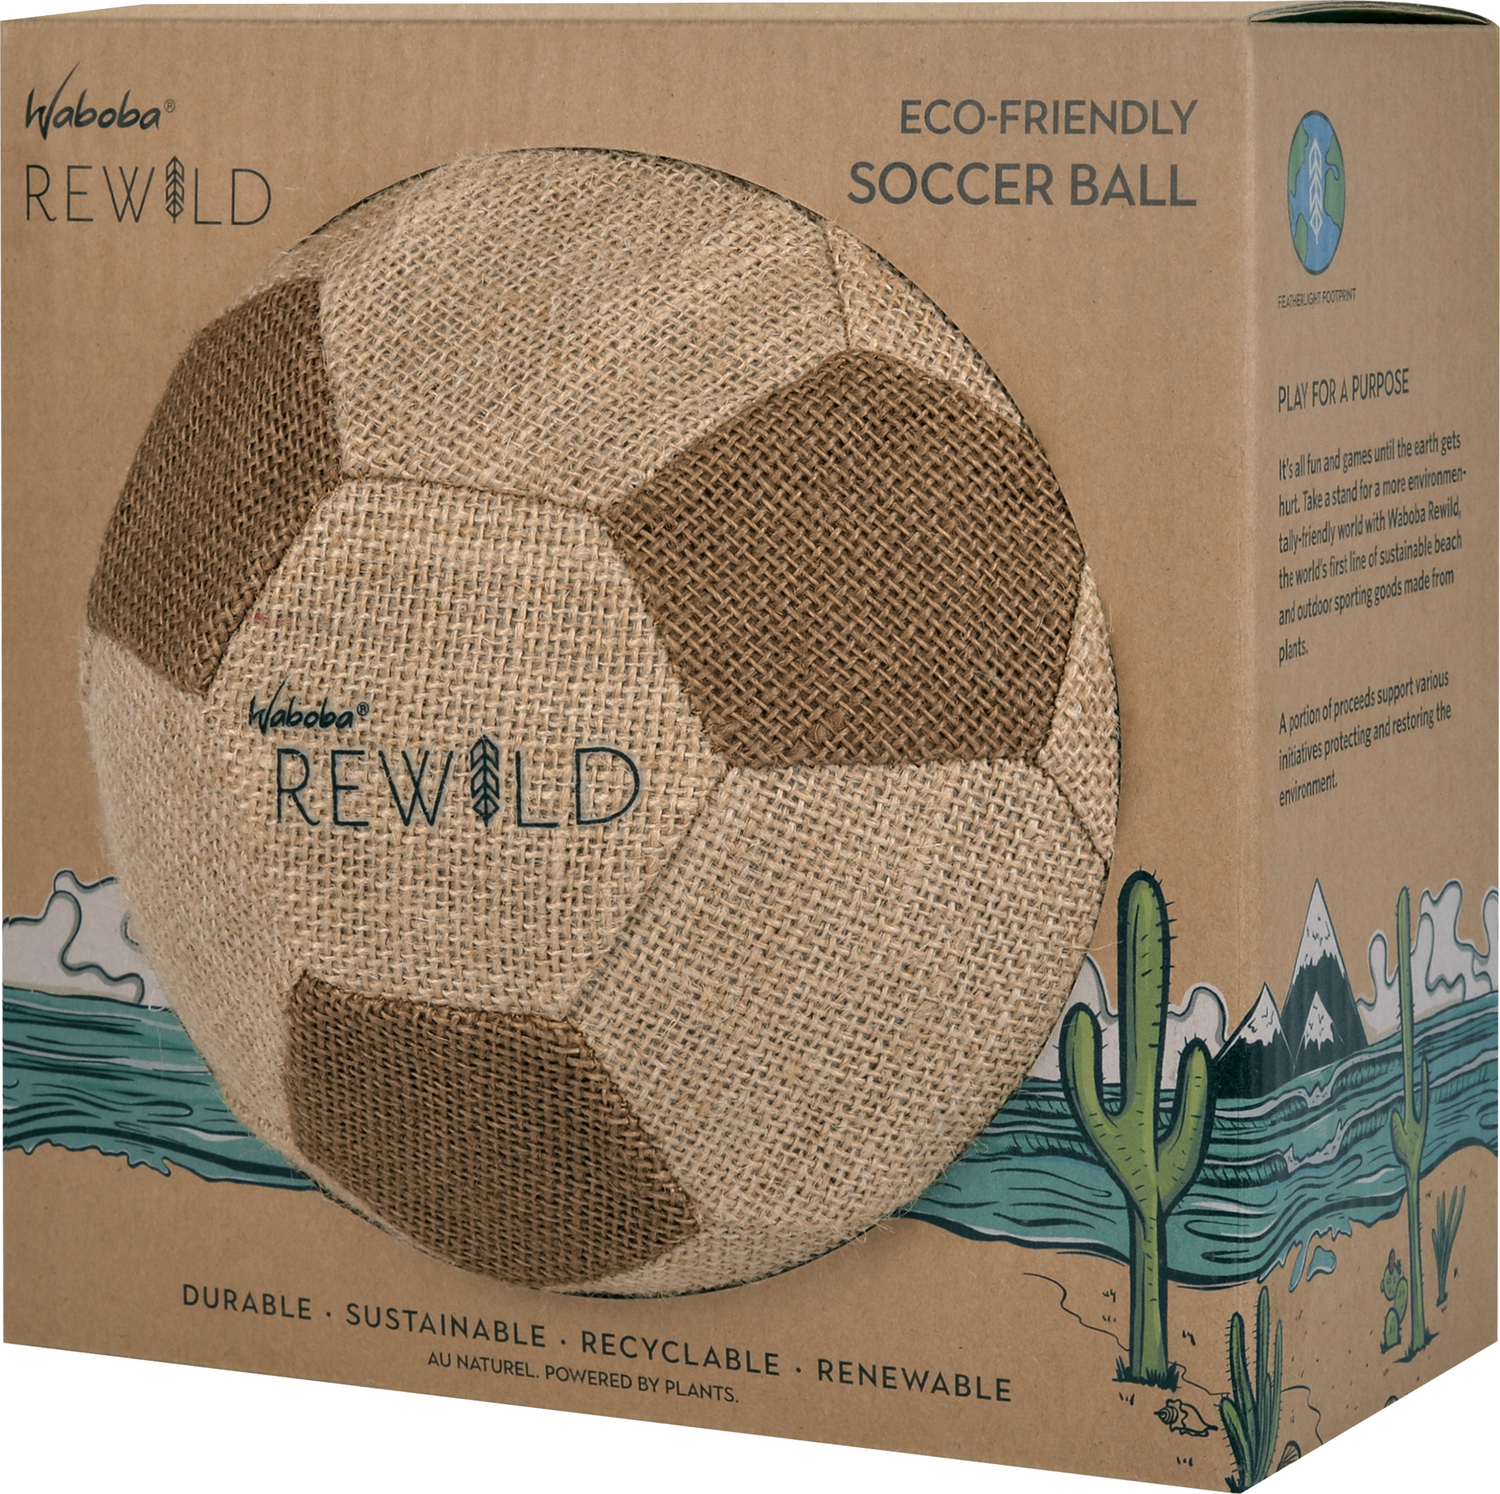 Eco-bag Made From Recycled Soccer Ball - Green Design Blog